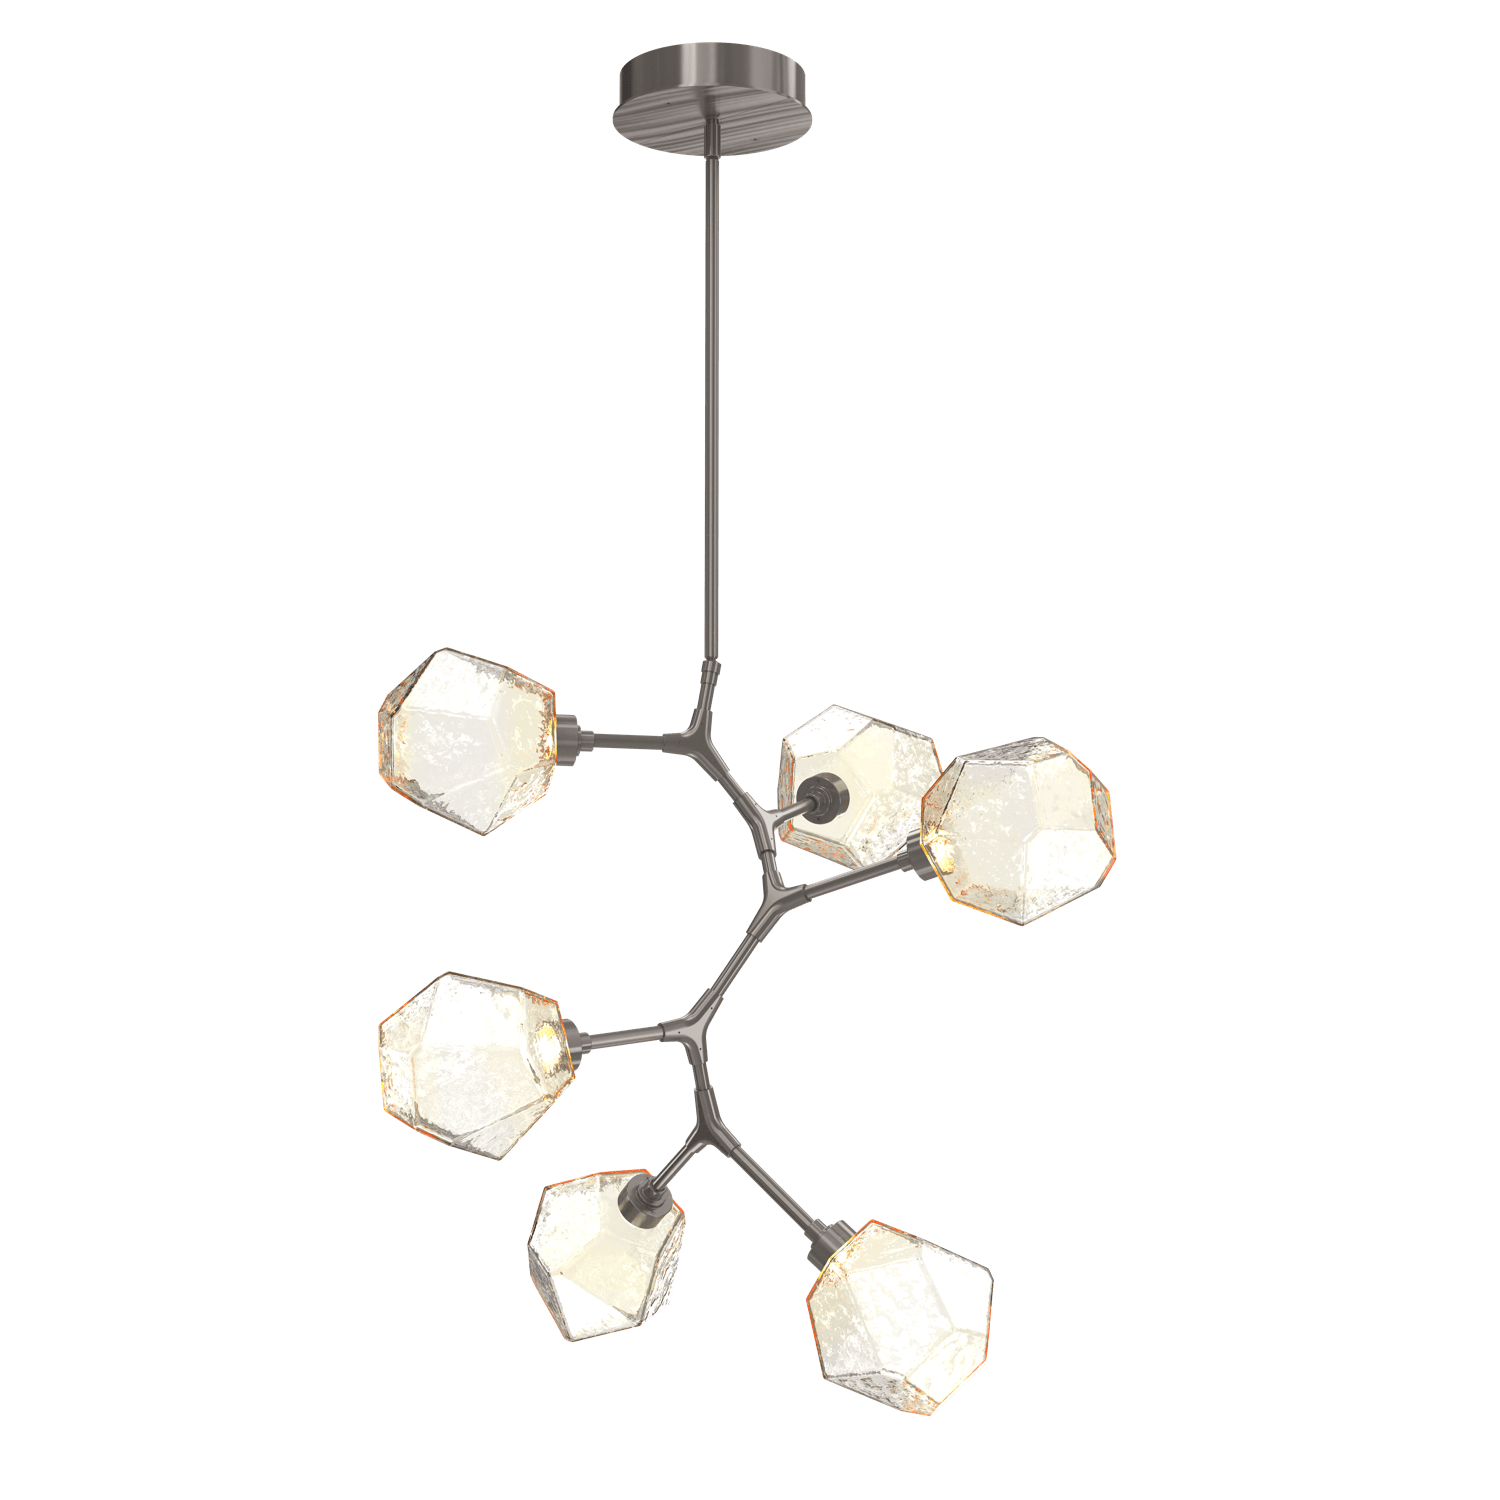 CHB0039-VA-GM-A-Hammerton-Studio-Gem-6-light-modern-vine-chandelier-with-gunmetal-finish-and-amber-blown-glass-shades-and-LED-lamping